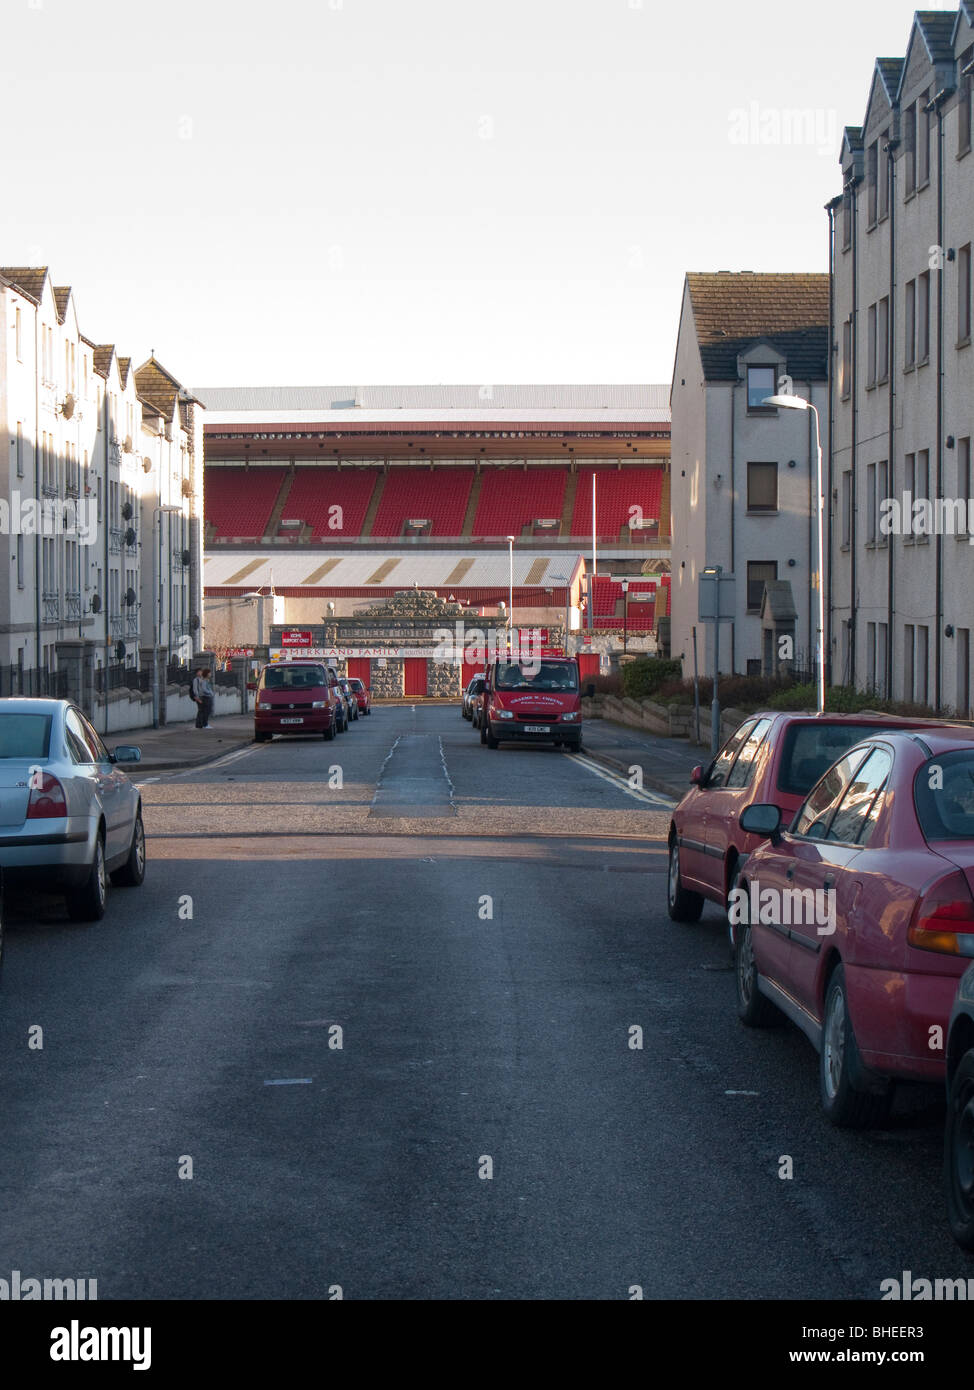 Aberdeen football club at end of street in residential area Stock Photo